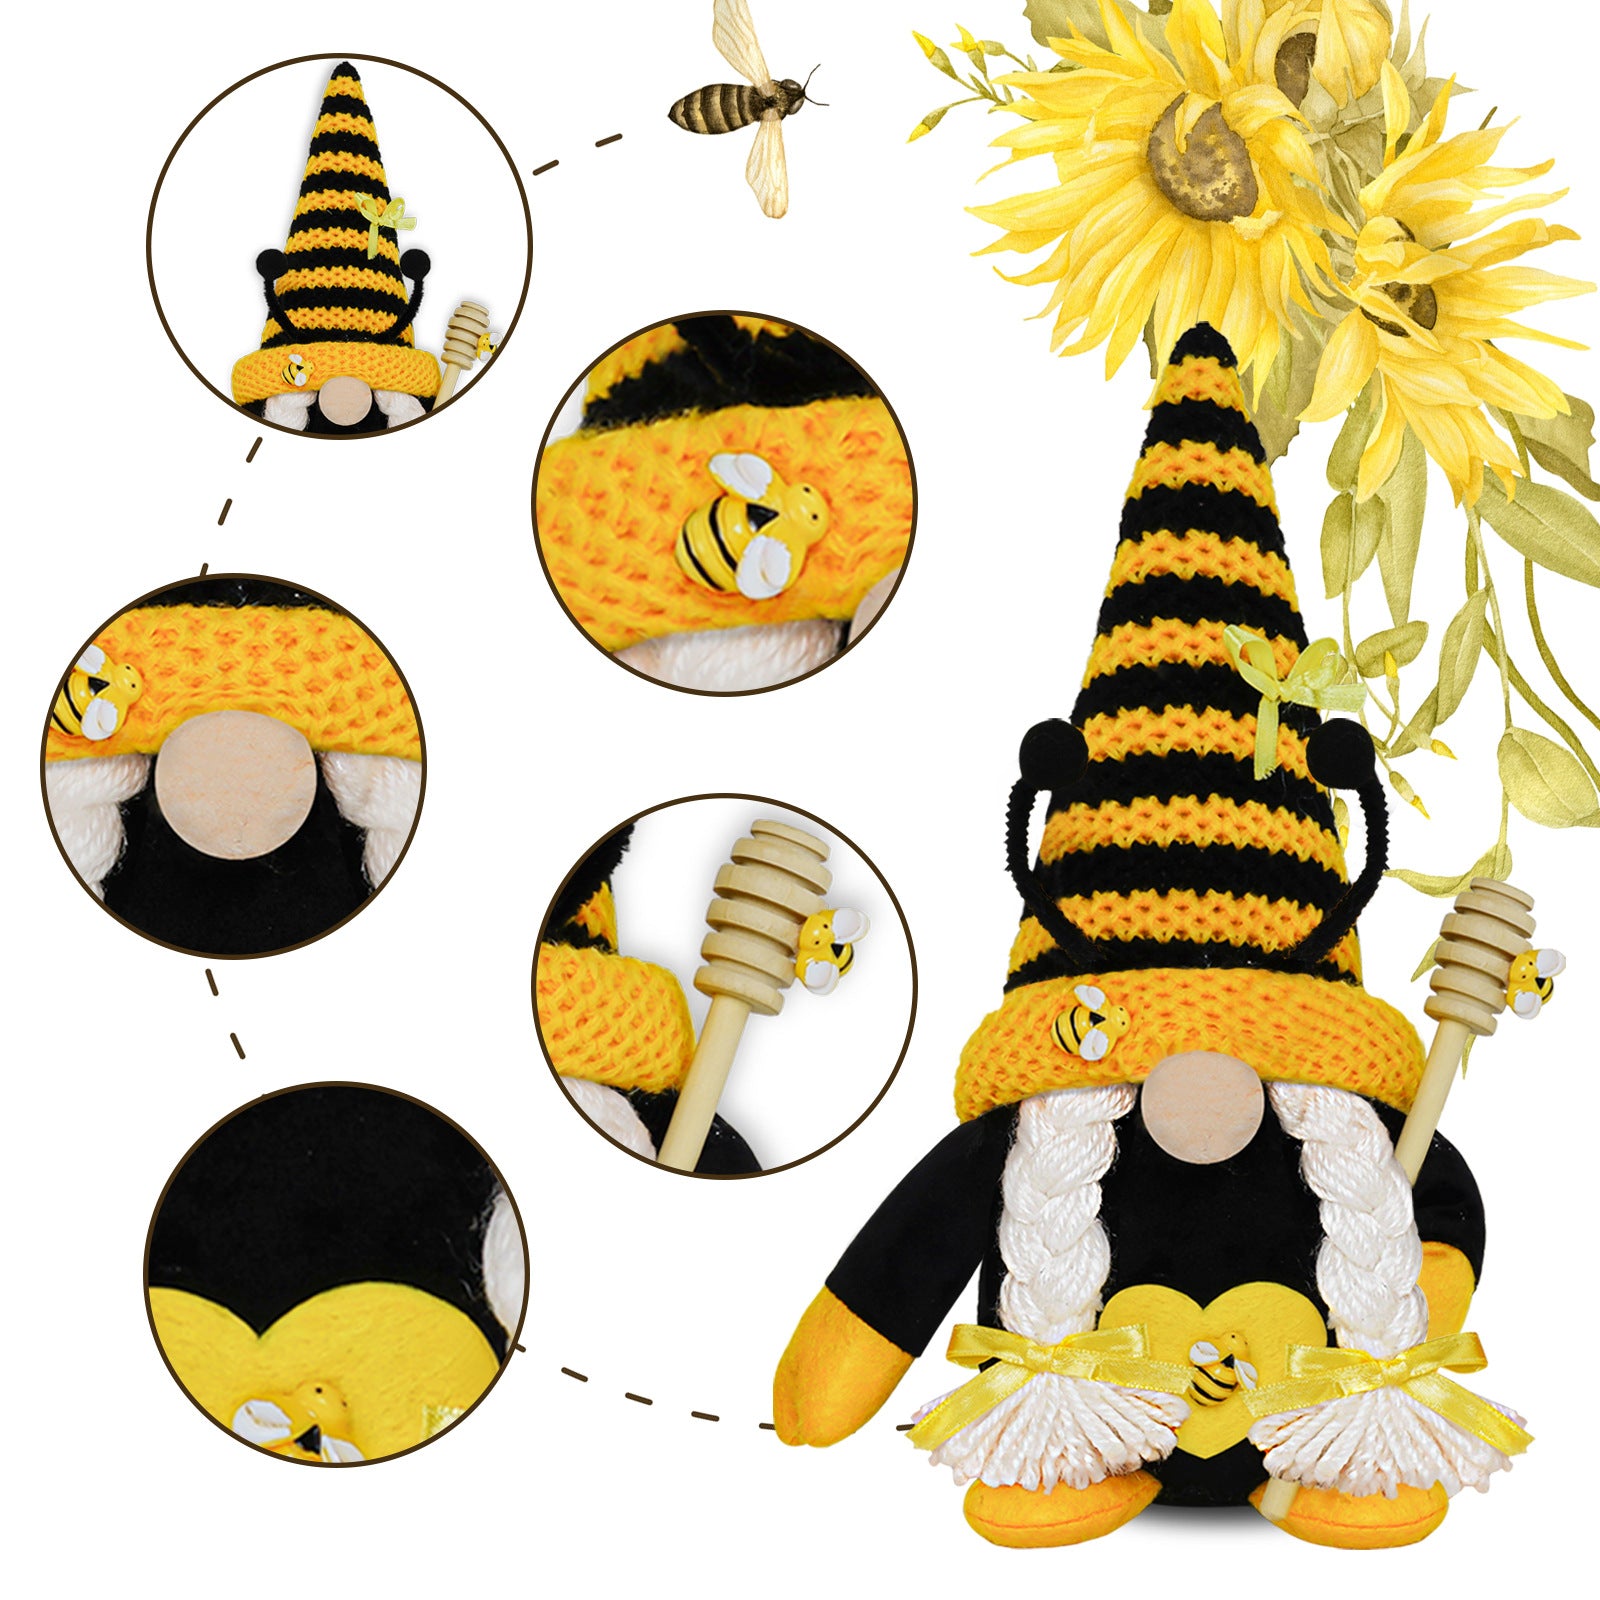 Bee Festival Faceless Rudolf Knitted Bee Old Man Festival Sun-facing Figurine Doll Decoration, Bee gnomes, Beekeeper gnomes, Honey gnomes, Bumblebee gnomes, Beehive gnomes, Pollen gnomes, Garden gnomes, Spring gnomes, Flower gnomes, Nature gnomes, Decorative gnomes, Rustic gnomes, Festive gnomes, Yellow and black gnomes, Bee-friendly gnomes, Happy bees gnomes,